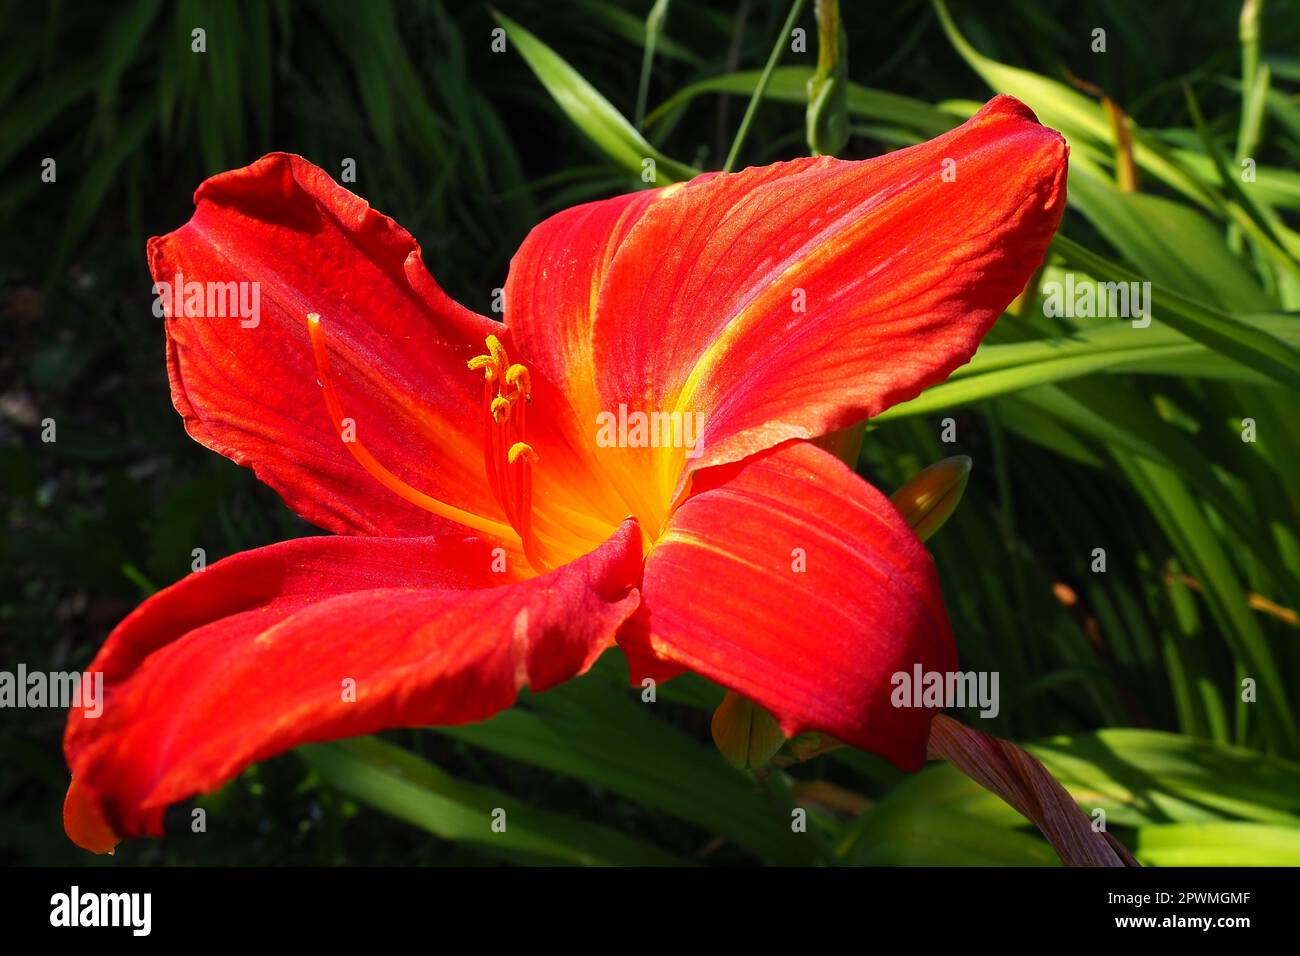 Hemerocallis hybrid Anzac is a genus of plants of the Lilaynikov family Asphodelaceae. Beautiful red lily flowers with six petals. Long thin green lea Stock Photo